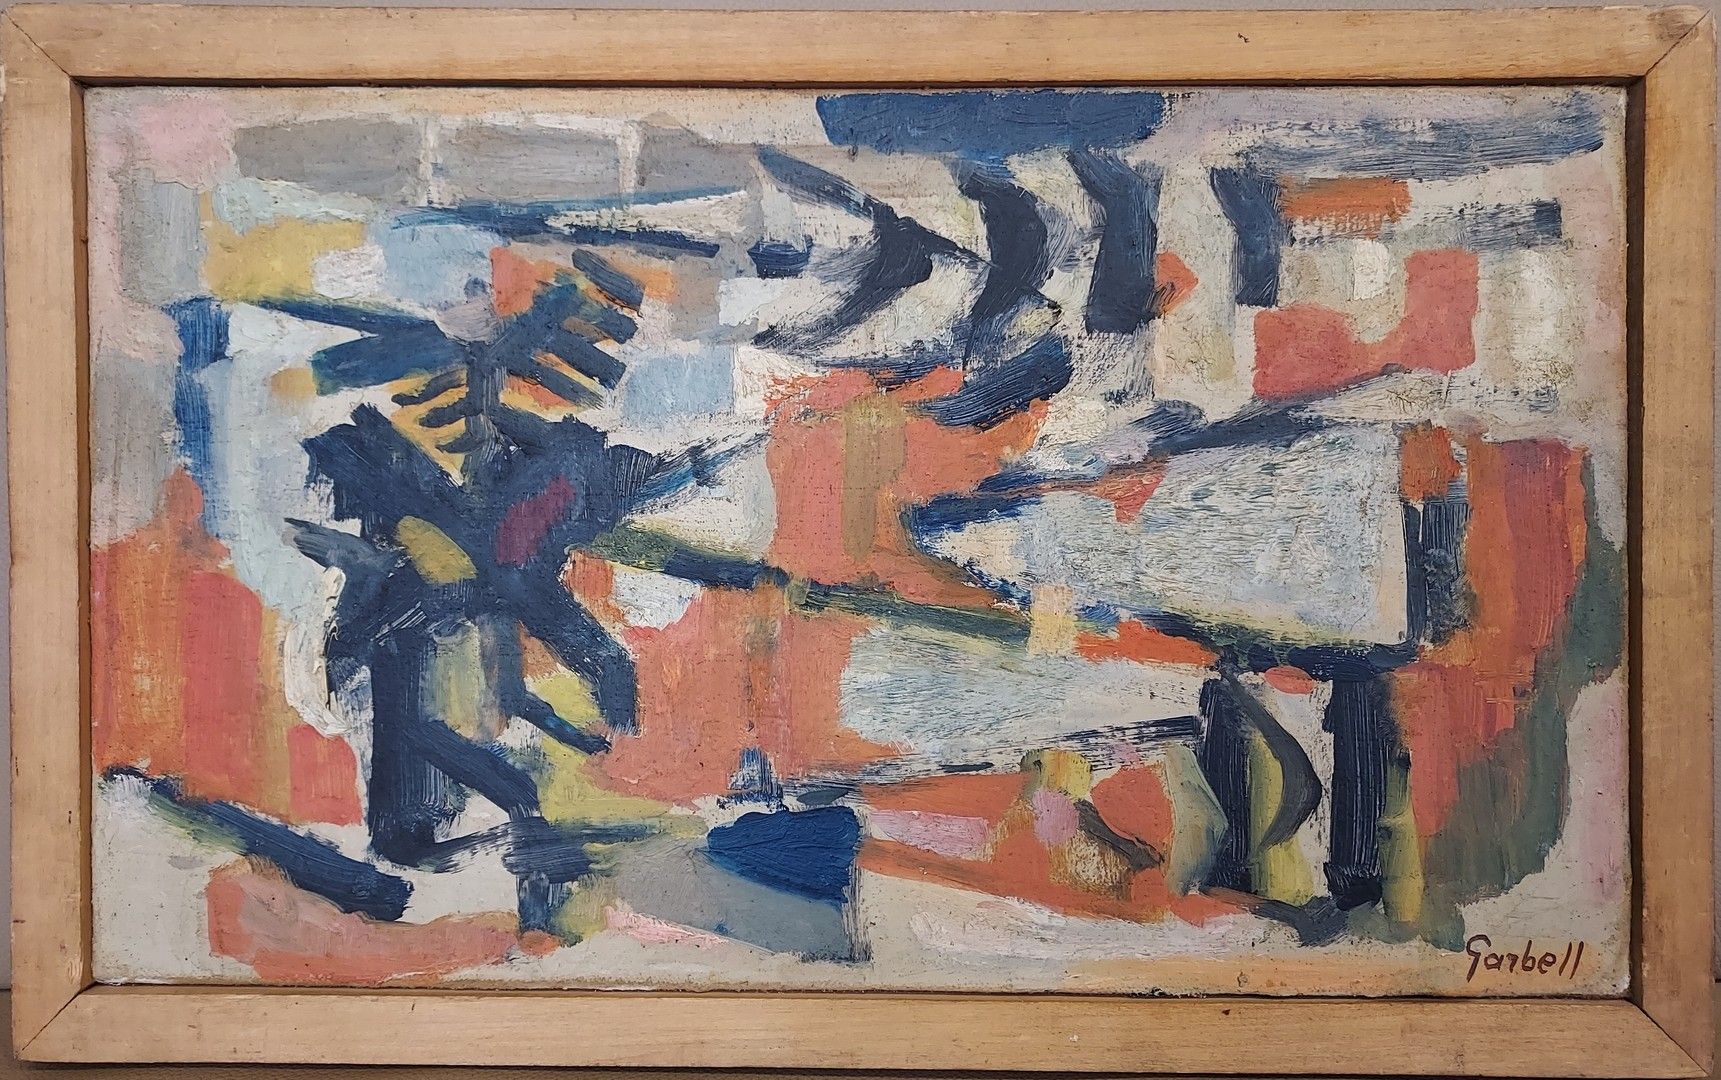 Alexandre GARBELL (1903-1970) In Algeria, 1953
Oil on canvas. Signed lower right&hellip;